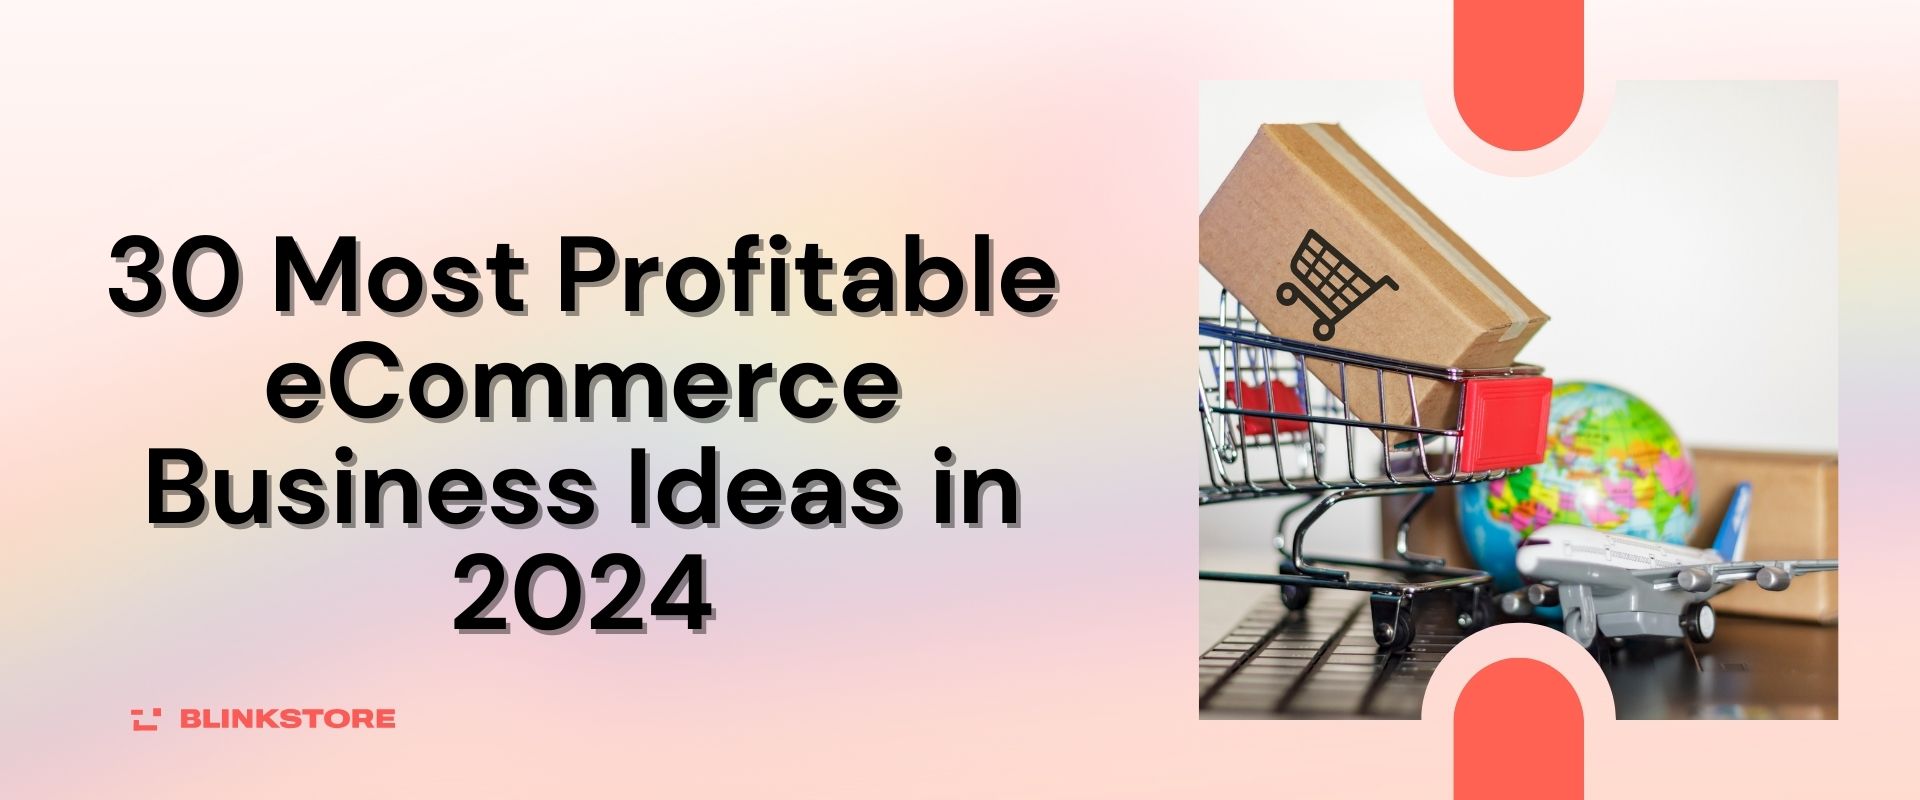 30 Most Profitable eCommerce Business Ideas in 2024